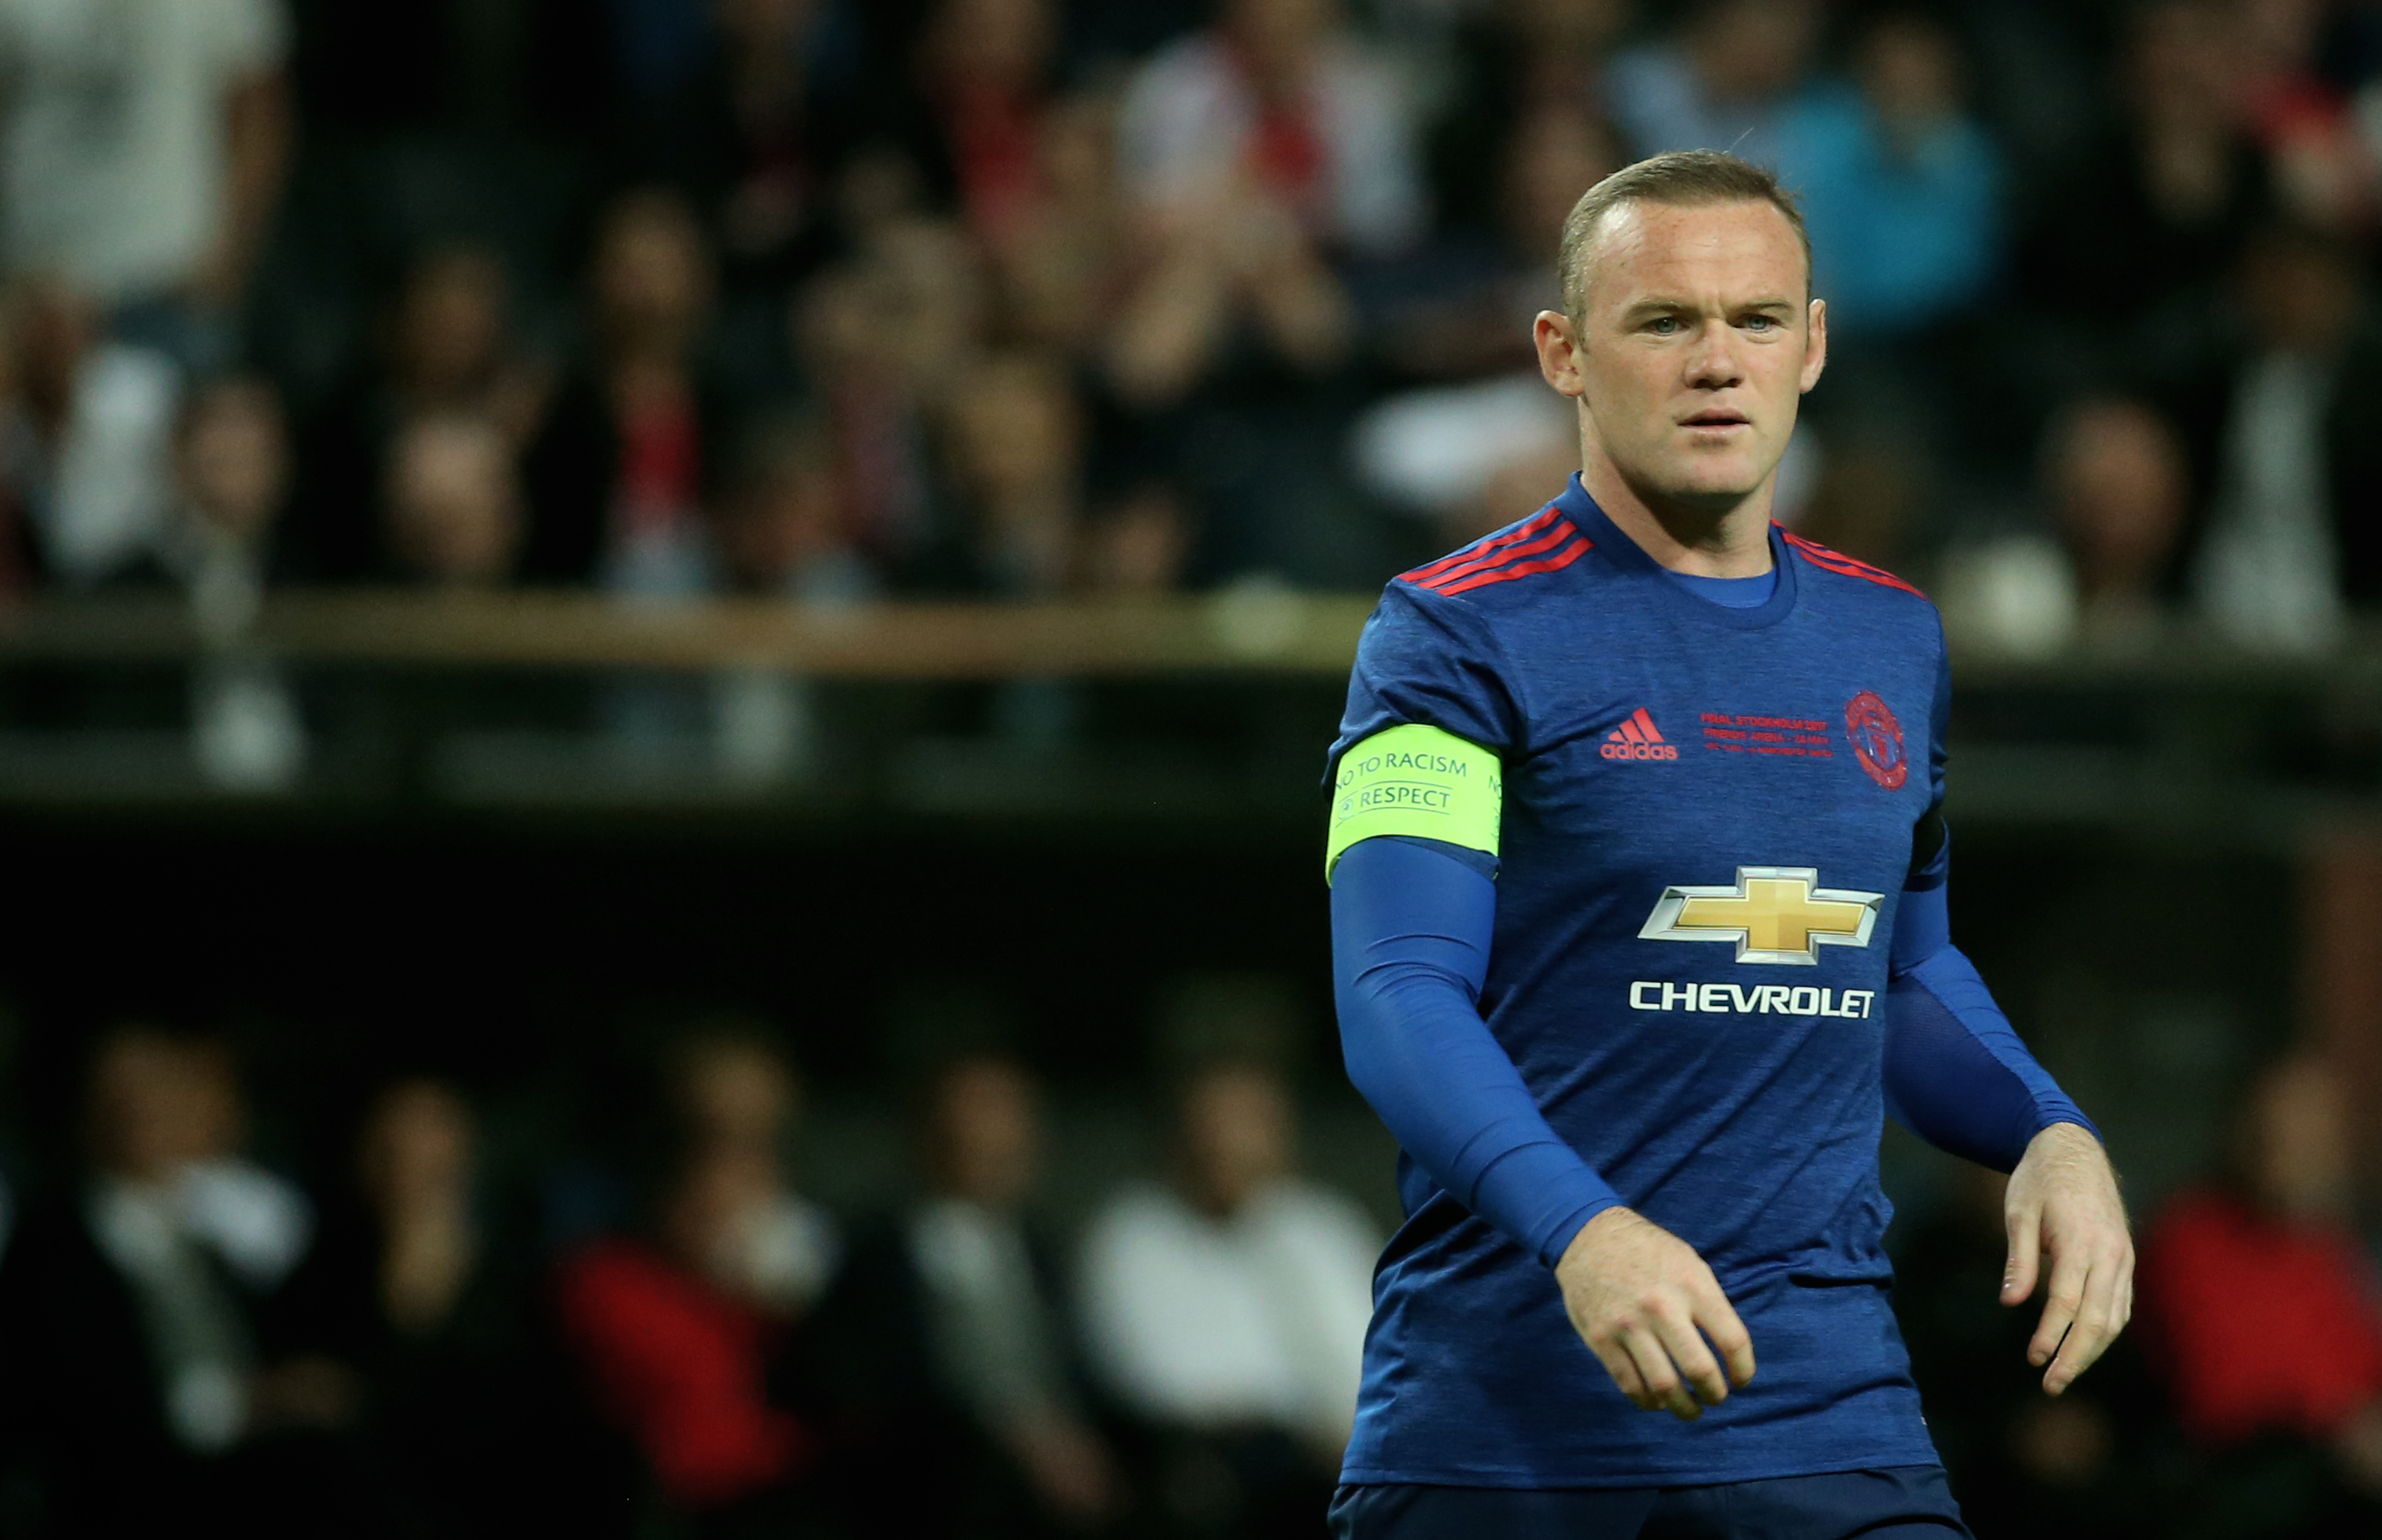 Manchester United's English striker Wayne Rooney (L) comes on the pitch during the UEFA Europa League final football match Ajax Amsterdam v Manchester United on May 24, 2017 at the Friends Arena in Solna outside Stockholm. / AFP PHOTO / Soren Andersson        (Photo credit should read SOREN ANDERSSON/AFP/Getty Images)